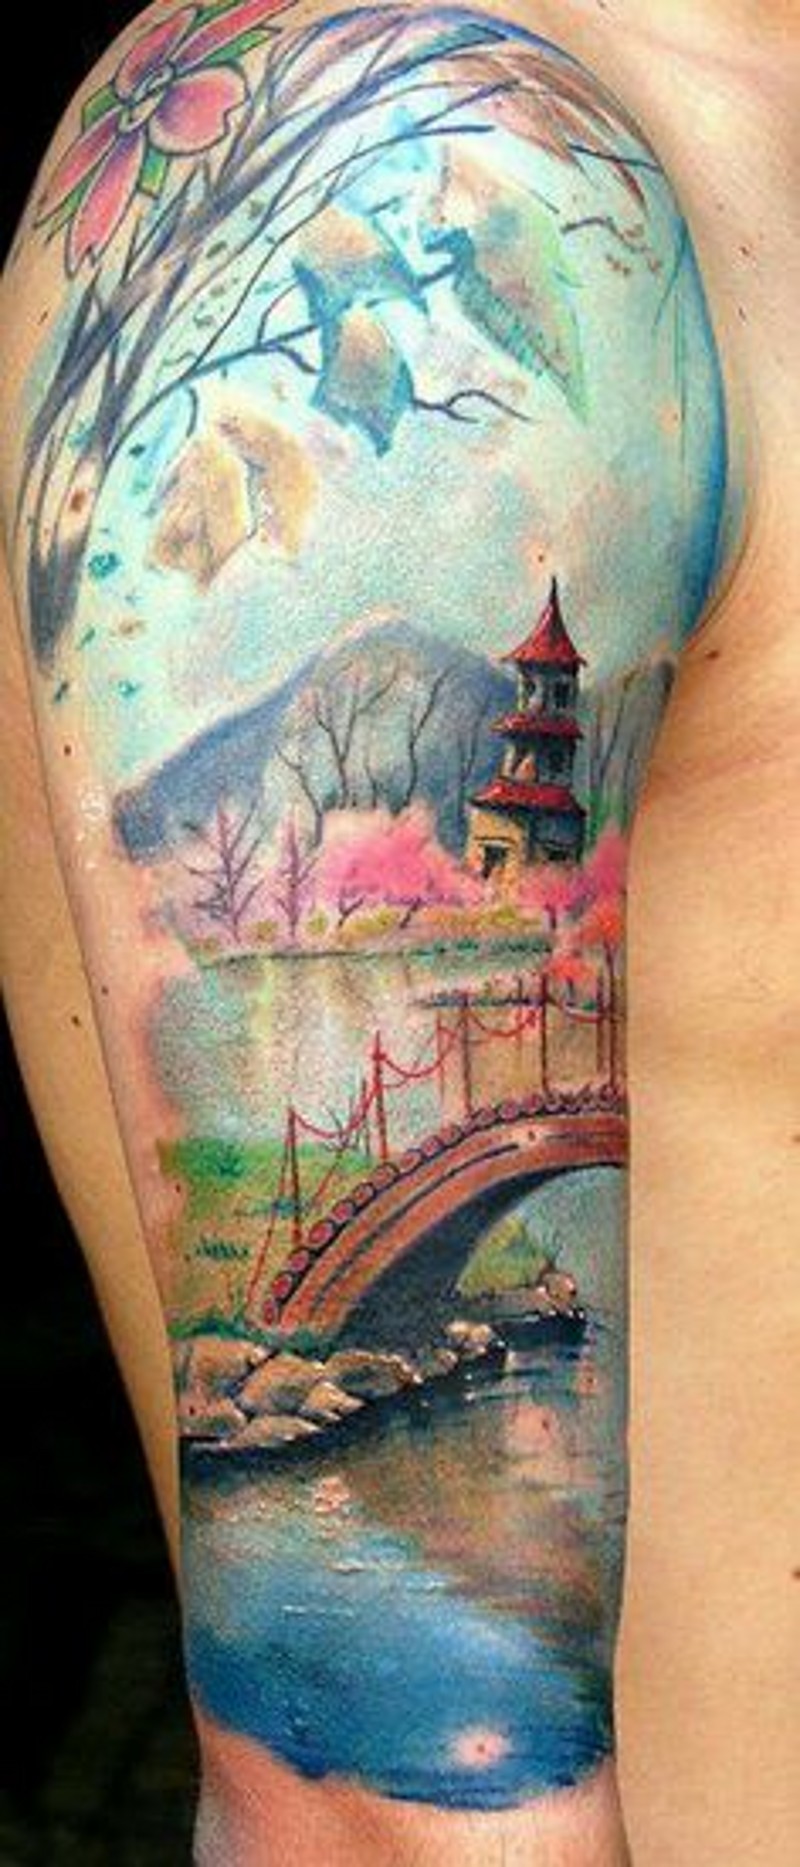 Glorious antic painting like colored Asian house in blooming garden tattoo on shoulder combined with mountain river and bridge